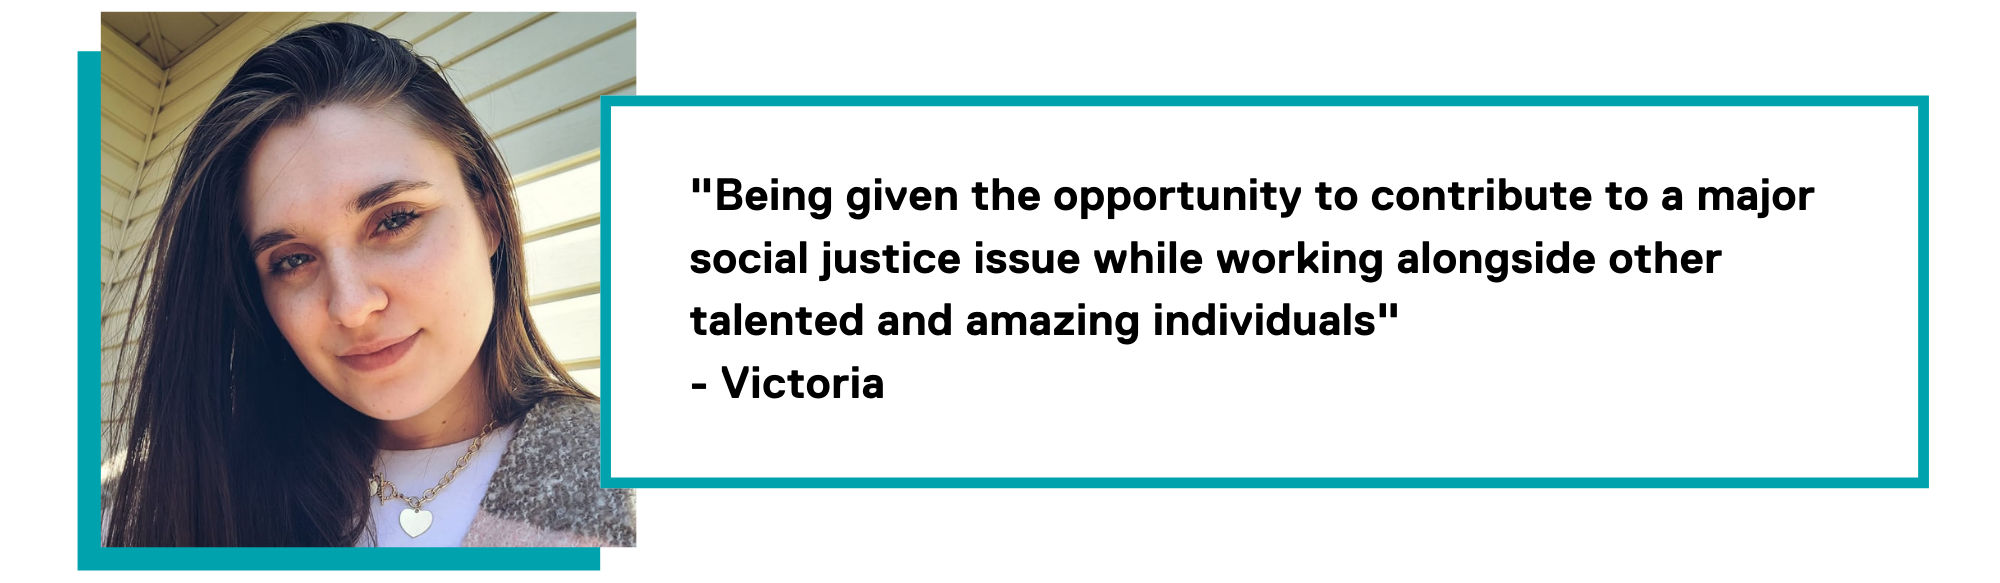 Graphic of a quote by Victoria stating ""Being given the opportunity to contribute to a major social justice issue while working alongside other talented and amazing individuals" - Victoria"